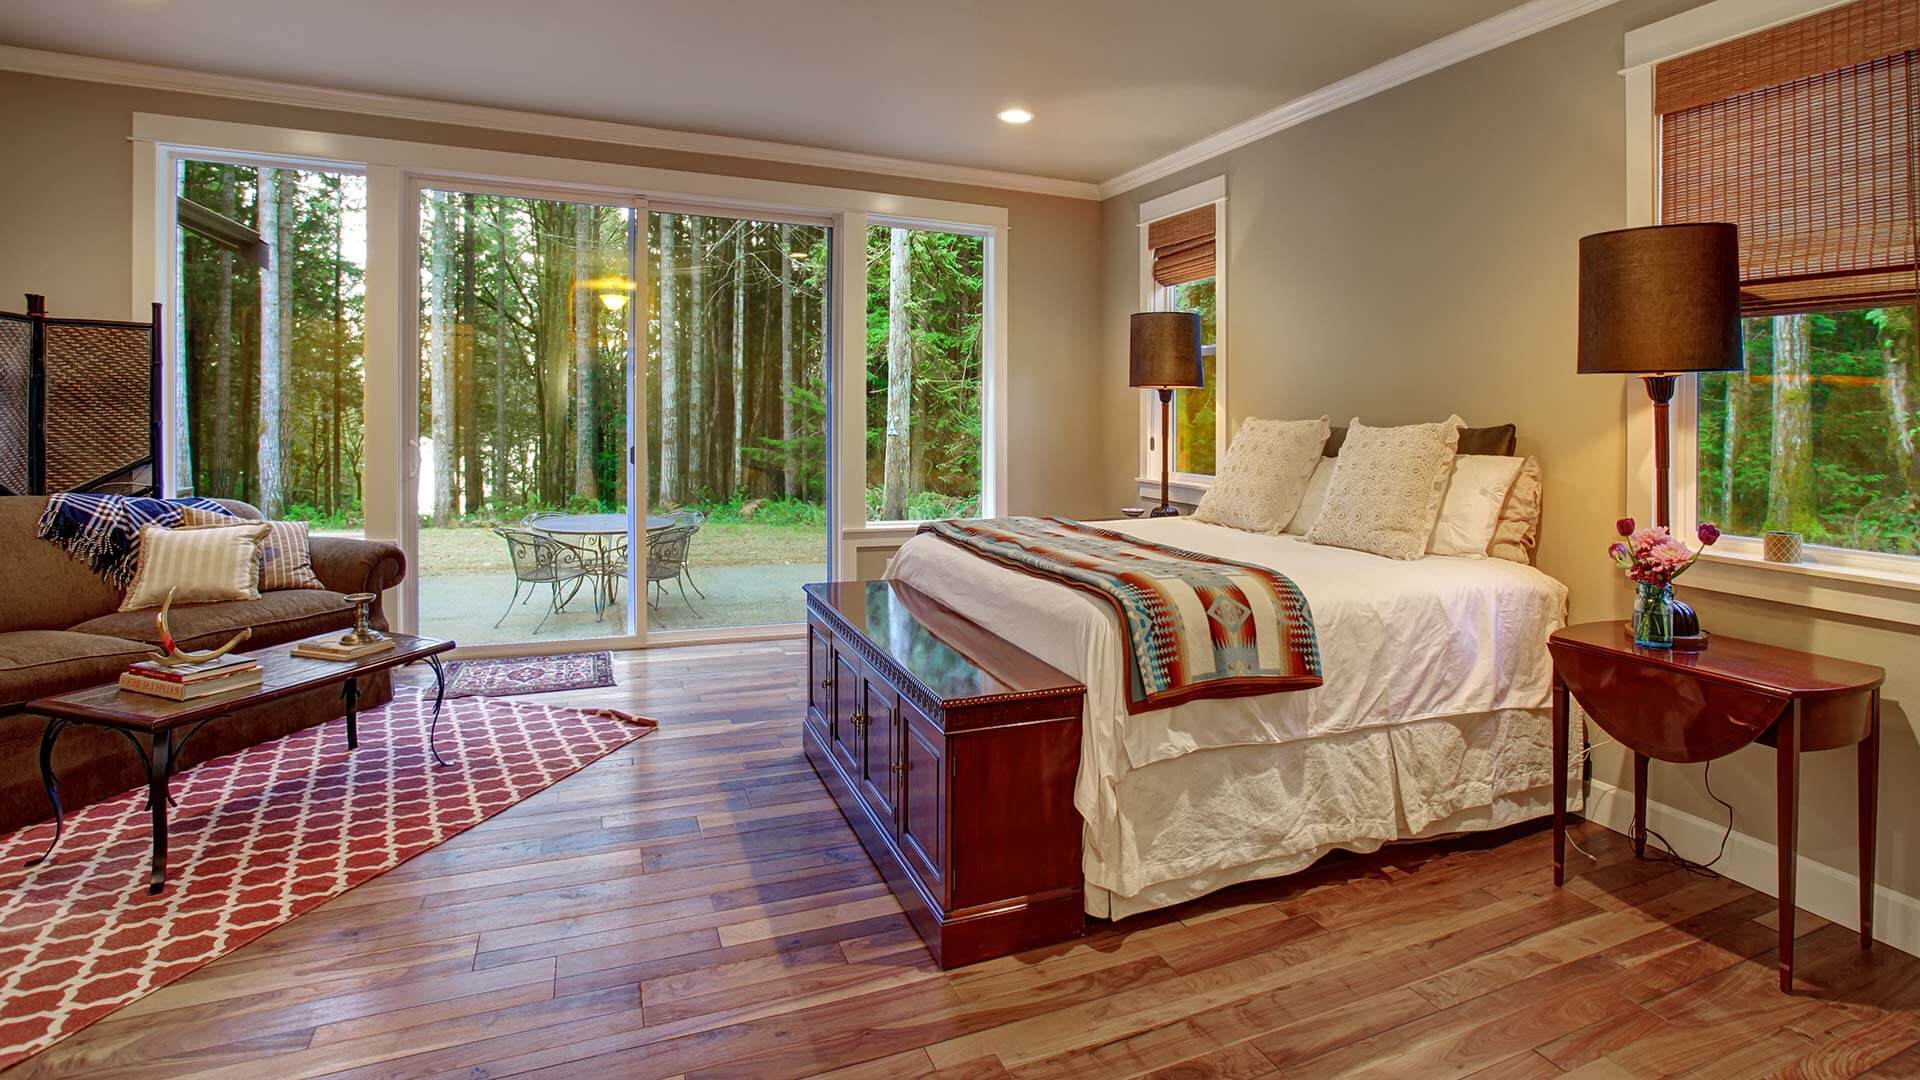 Patio doors with sidelites installed in a bedroom with rustic wood flooring.